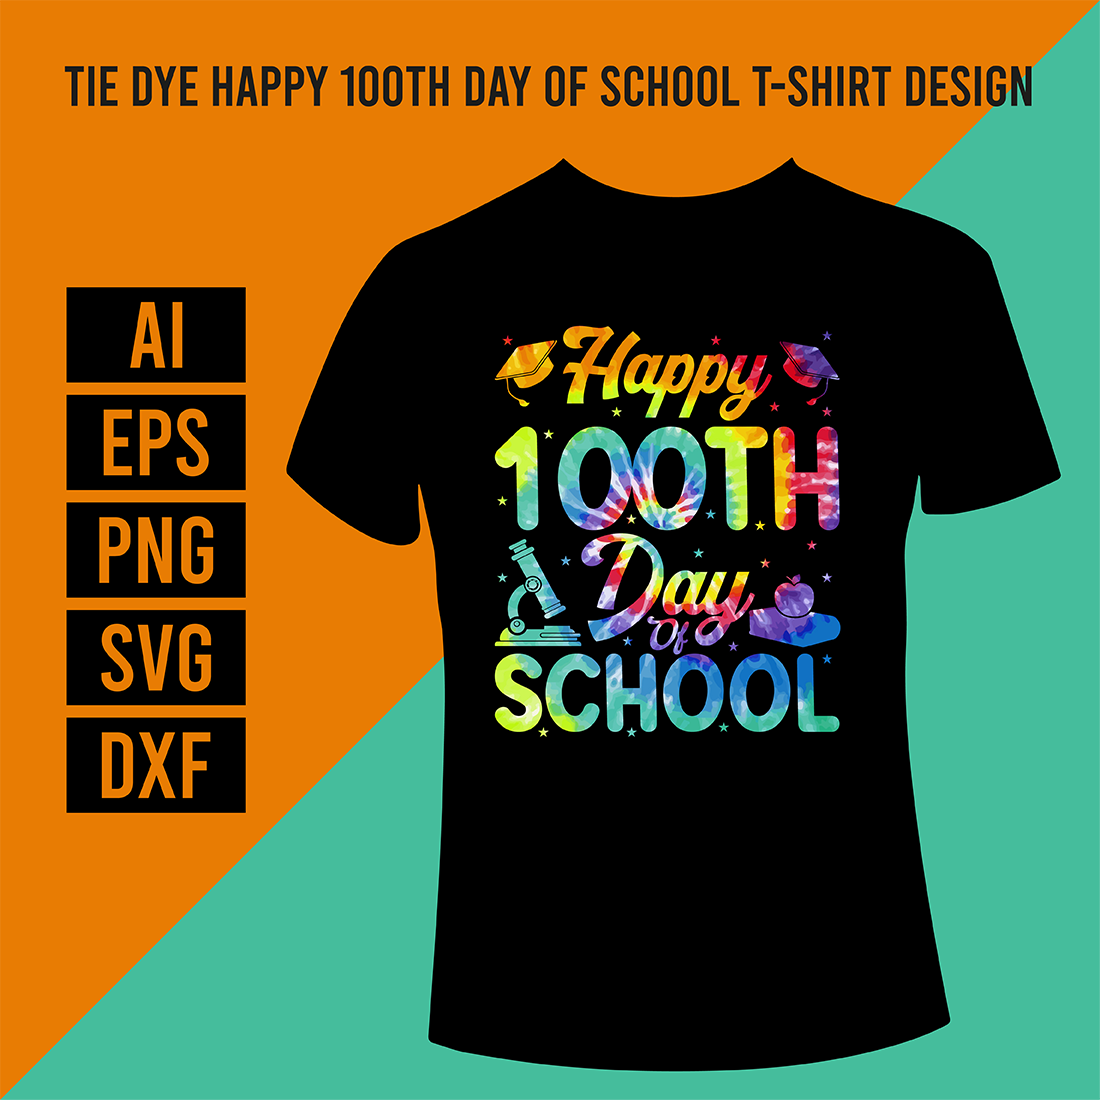 Tie Dye Happy 100th Day Of School T-Shirt Design cover image.